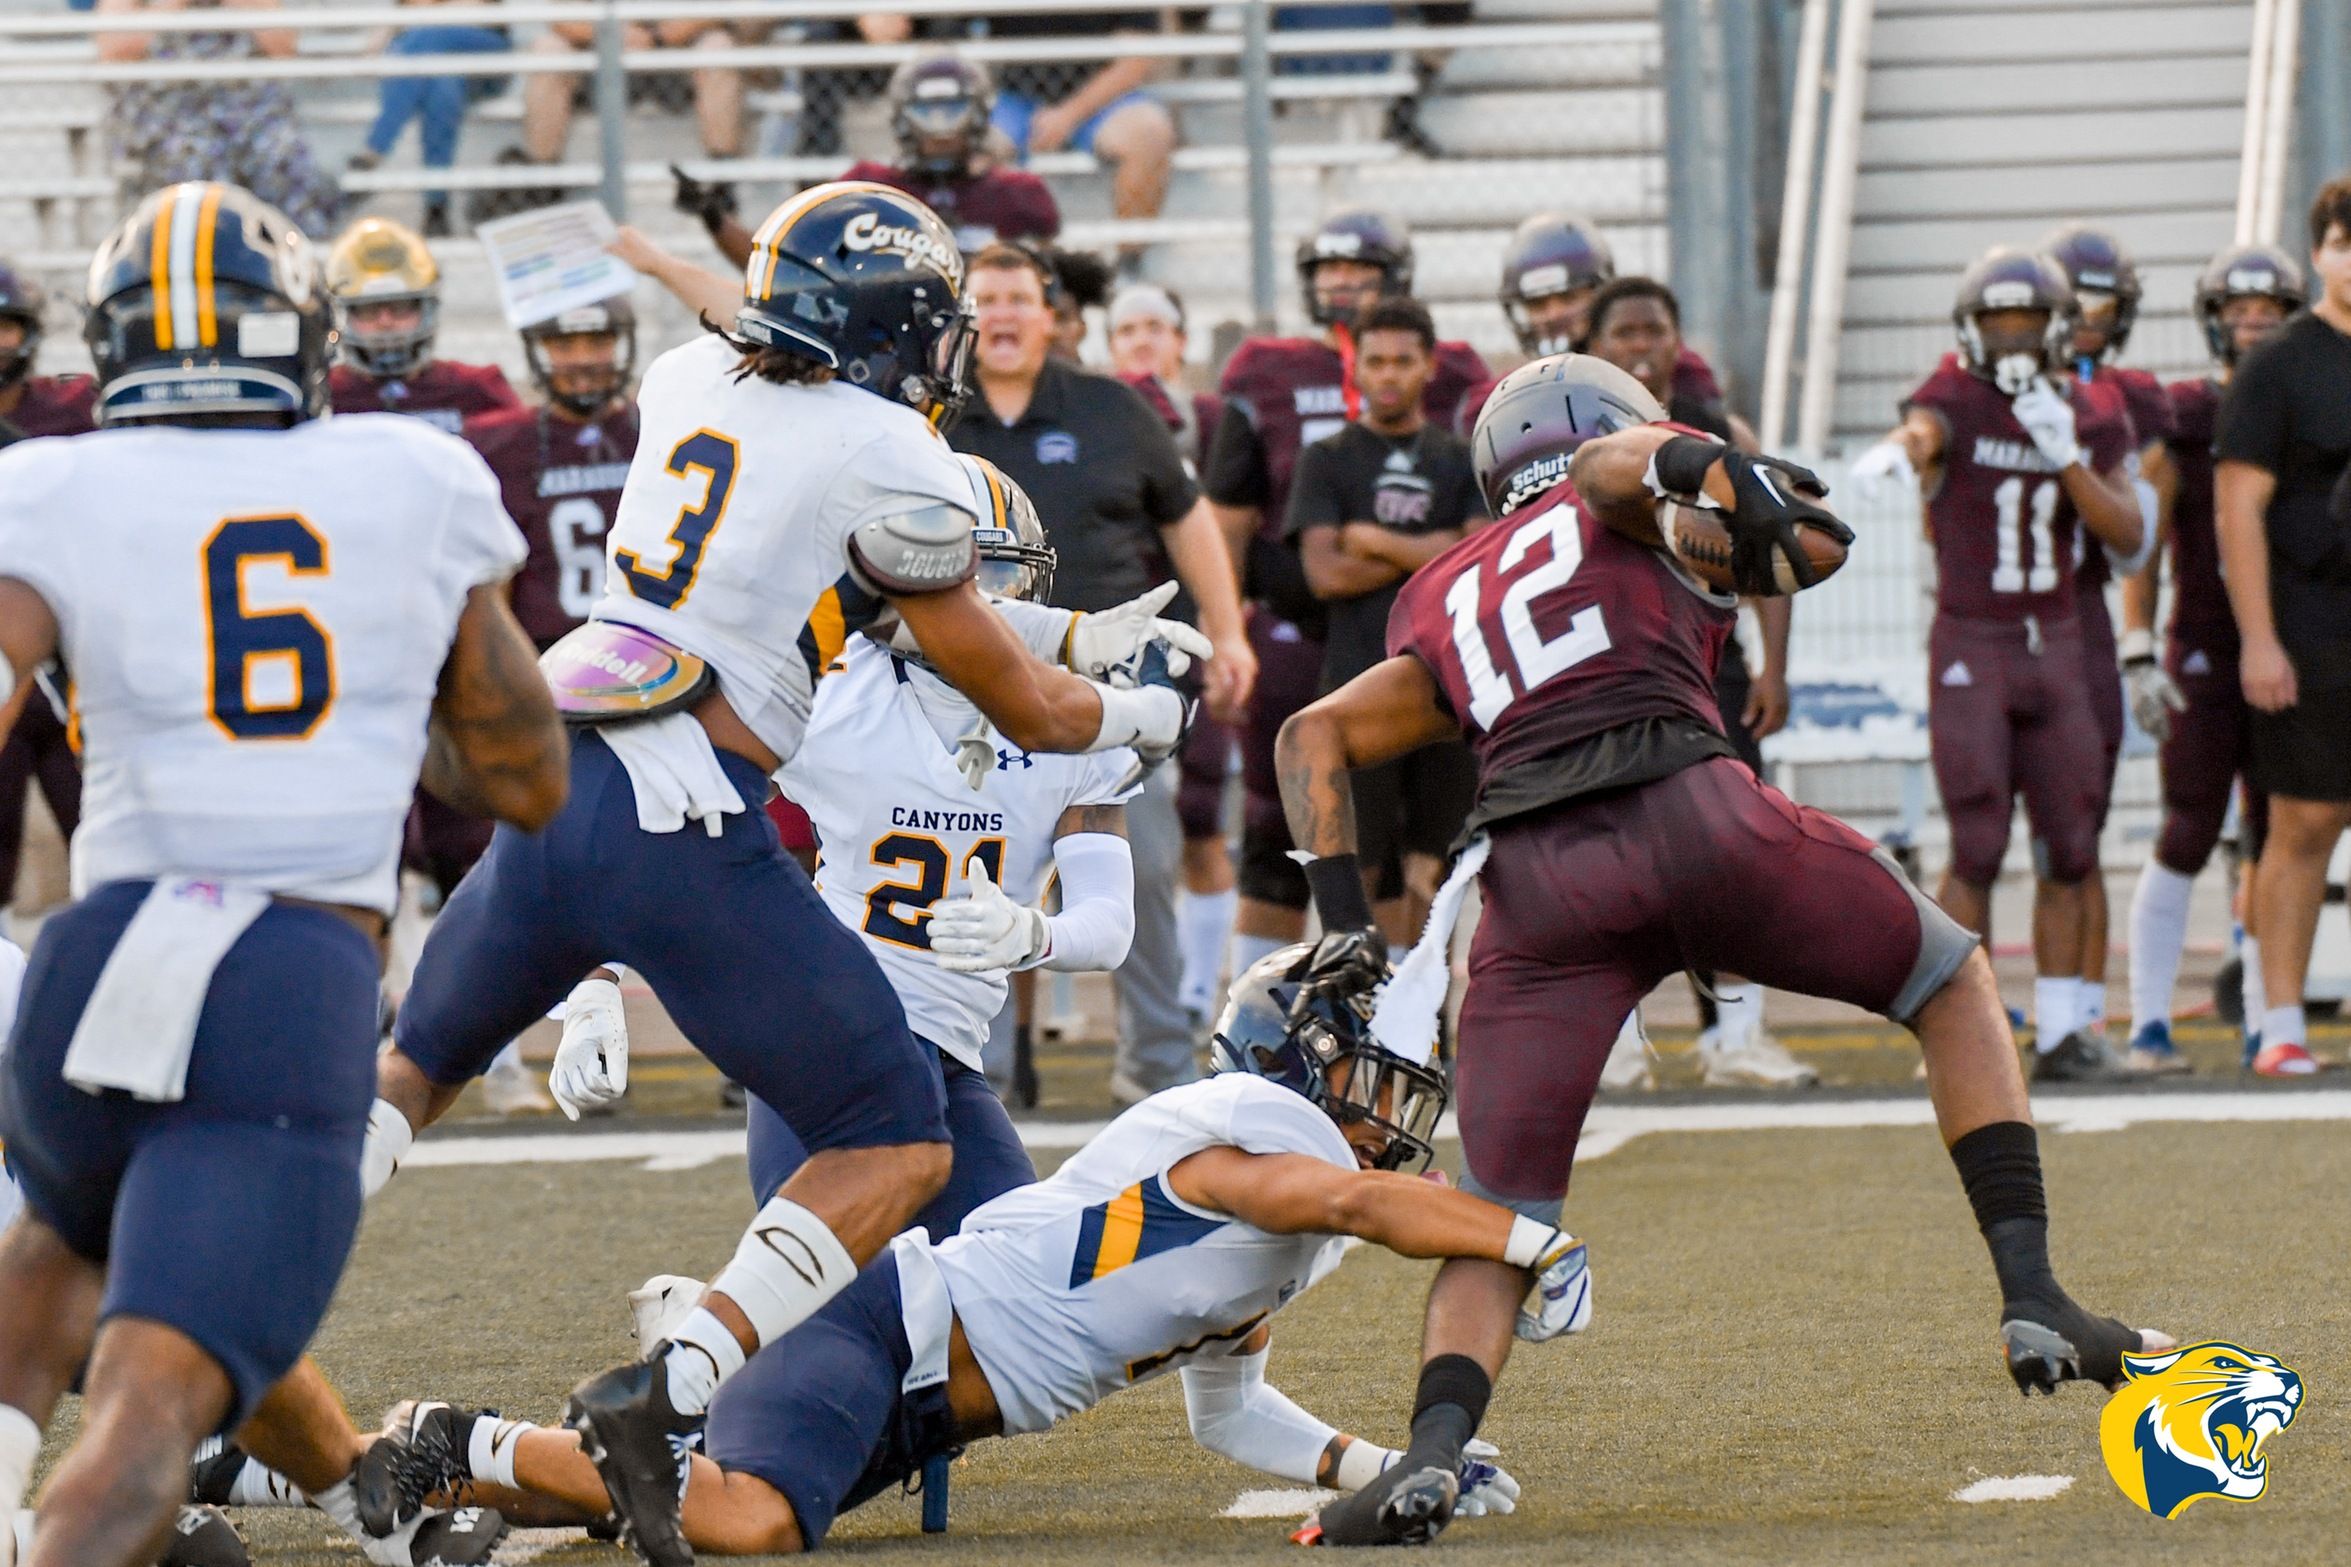 College of the Canyons football vs. Antelope Valley College on Sept. 3, 2022.